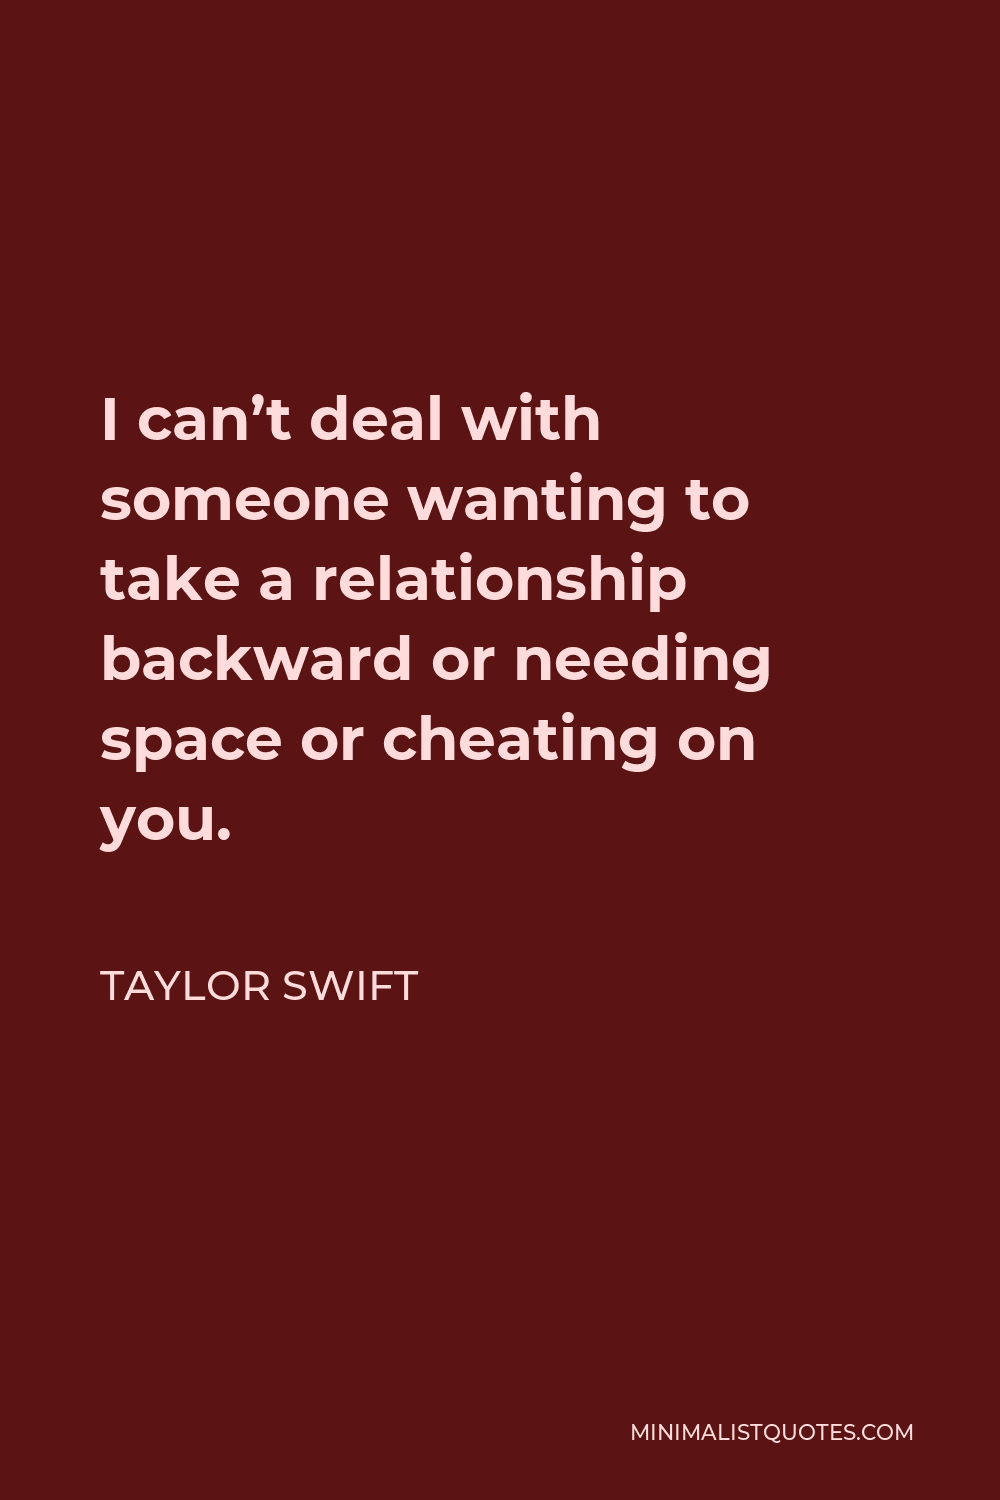 Taylor Swift Quote - I can’t deal with someone wanting to take a relationship backward or needing space or cheating on you.